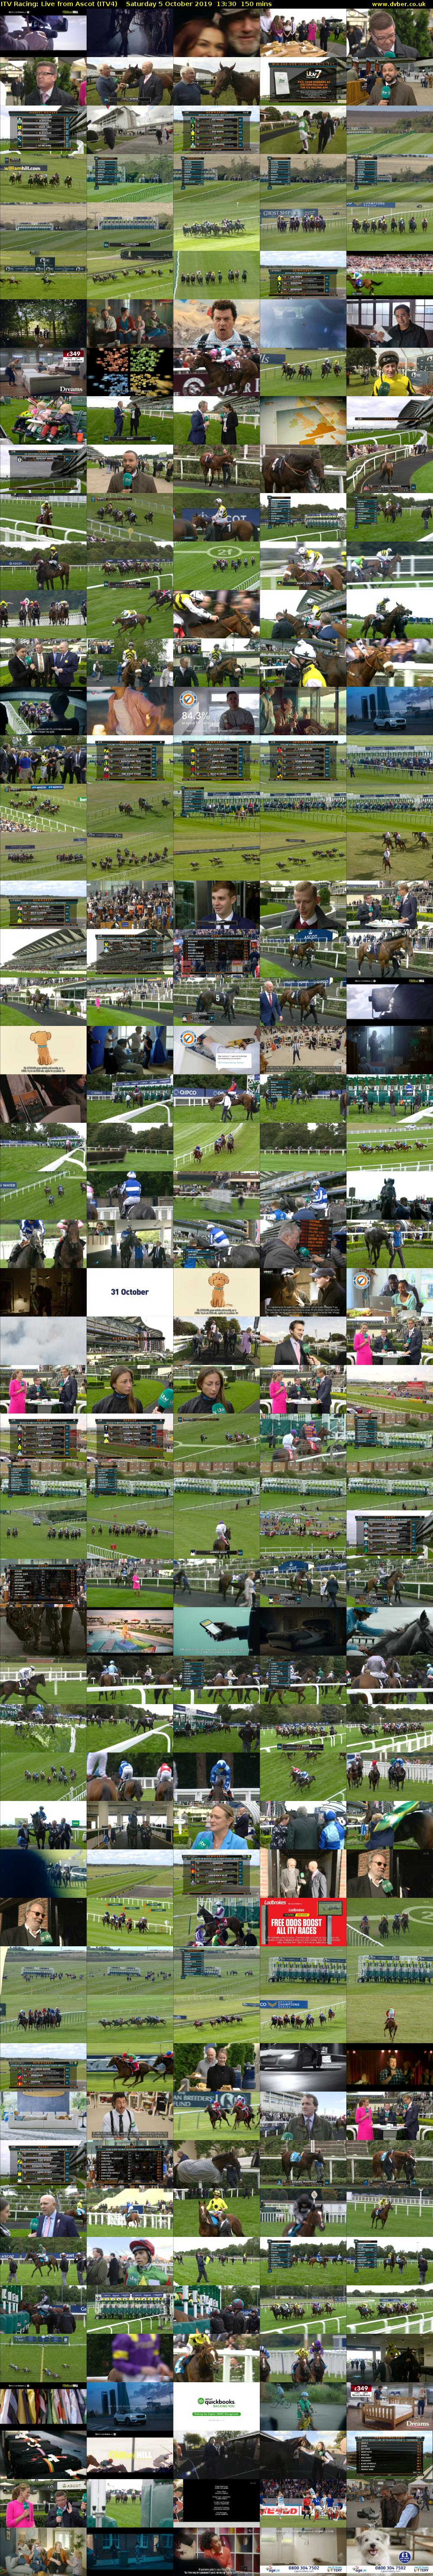 ITV Racing: Live from Ascot (ITV4) Saturday 5 October 2019 13:30 - 16:00